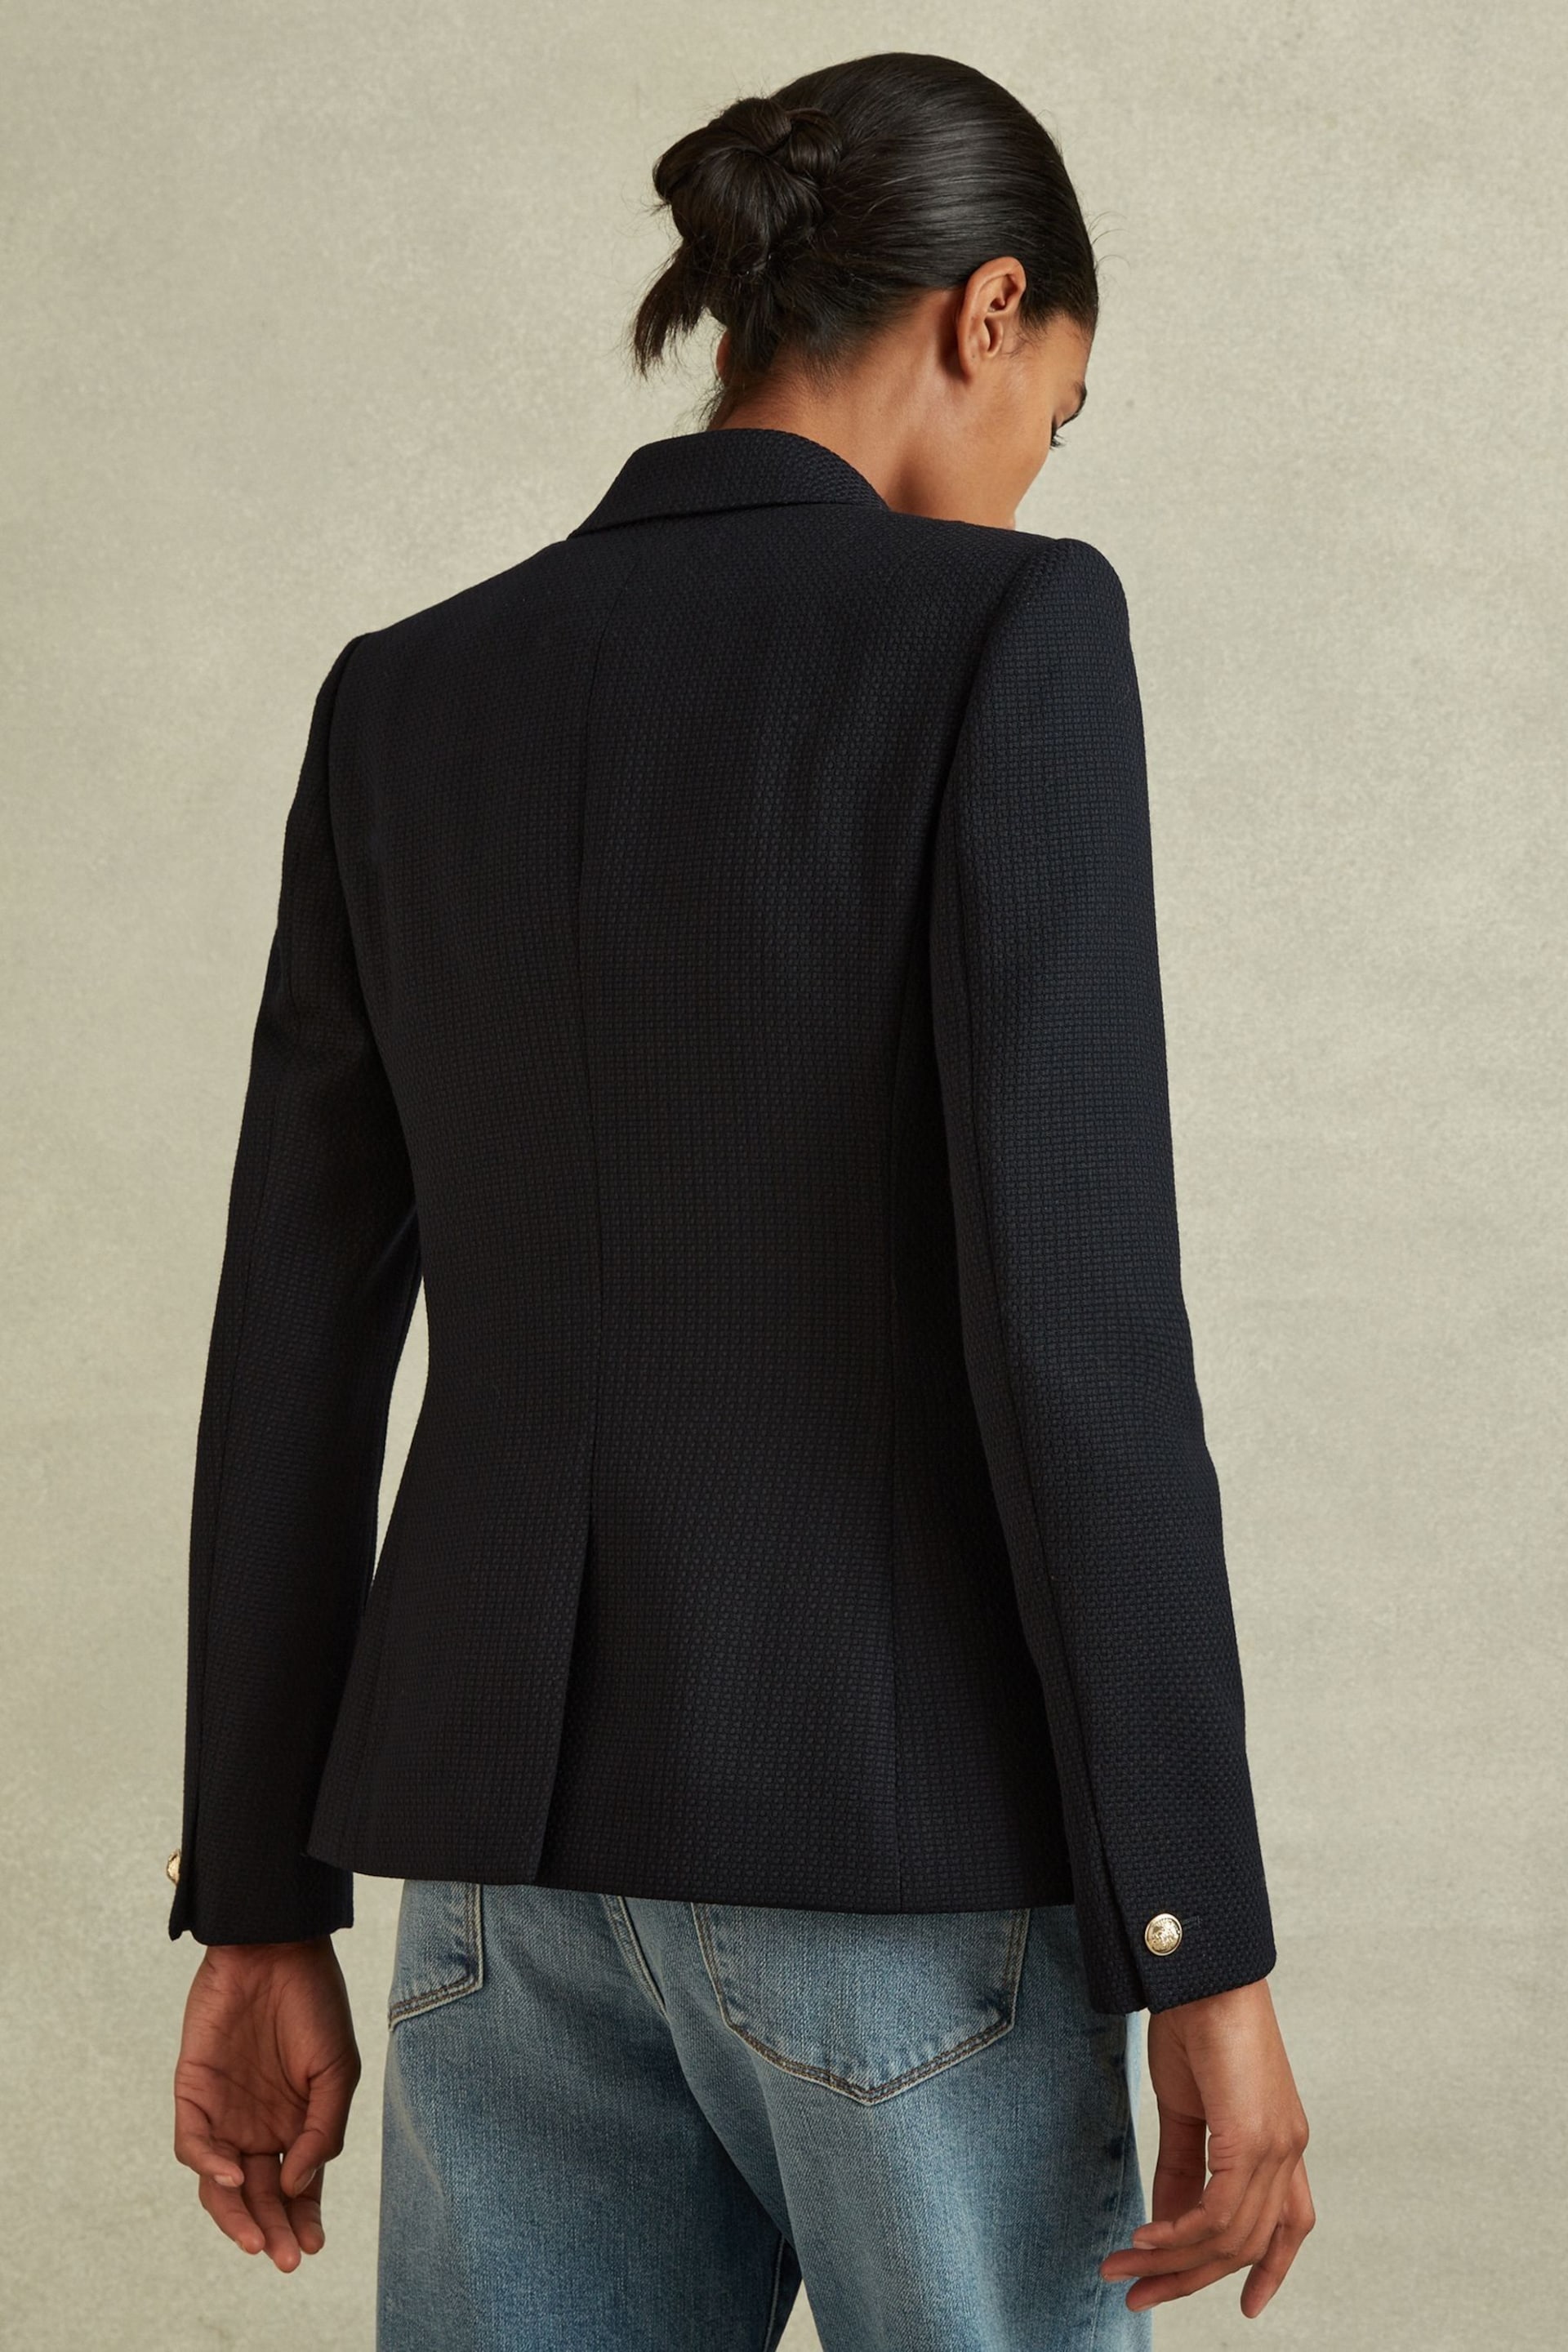 Reiss Navy Tally Petite Tailored Fit Textured Double Breasted Blazer - Image 5 of 7